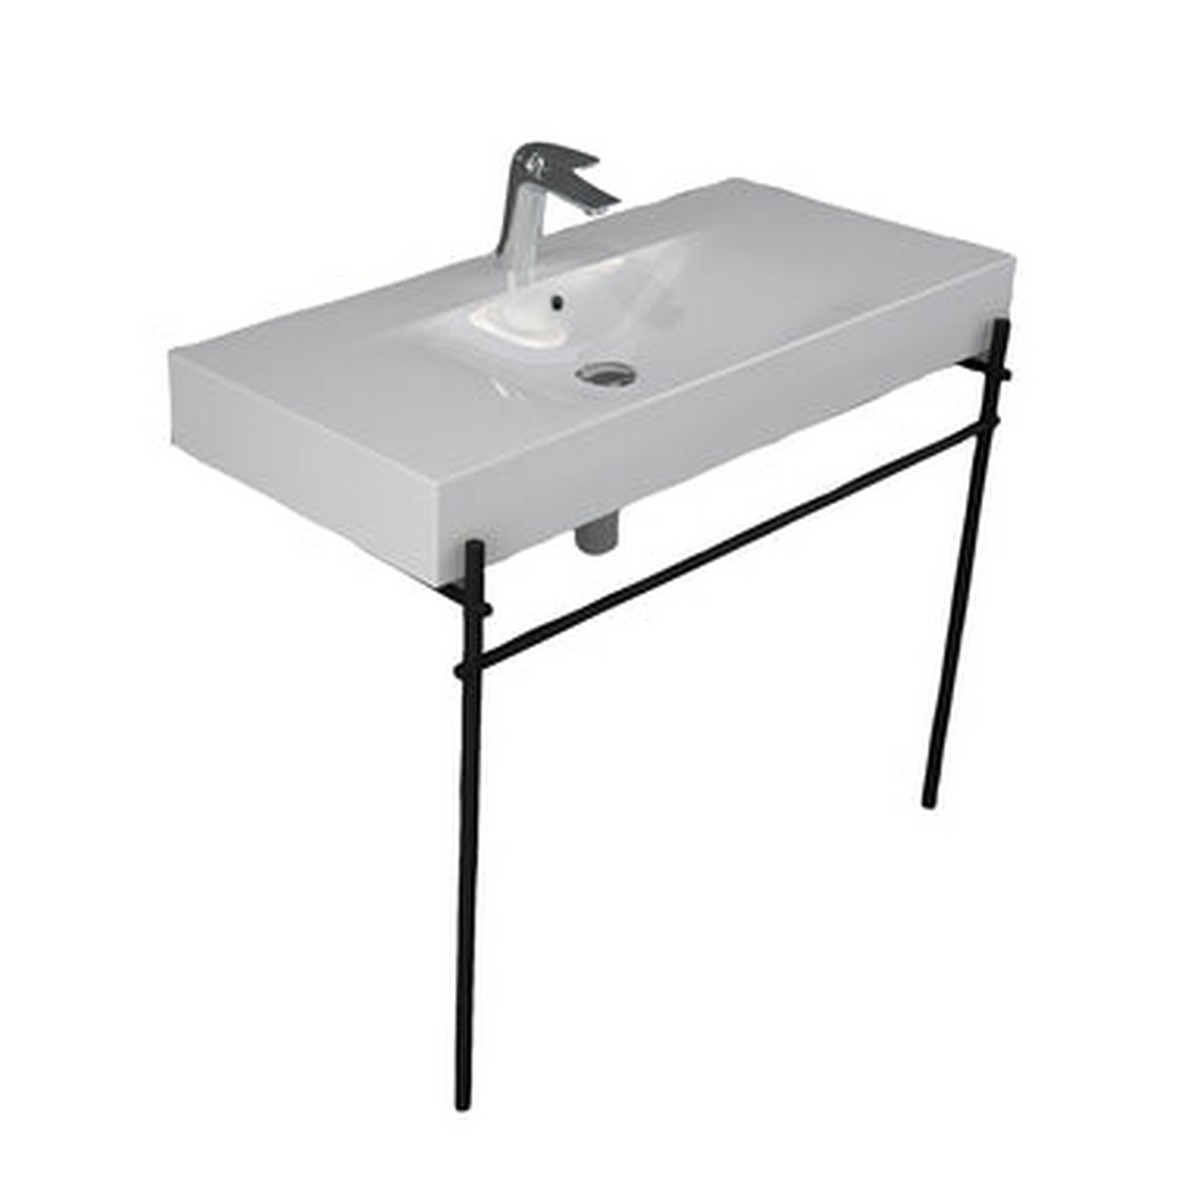 BARCLAY 620WH-MB DES 40 INCH FIRECLAY VESSEL BATHROOM SINK